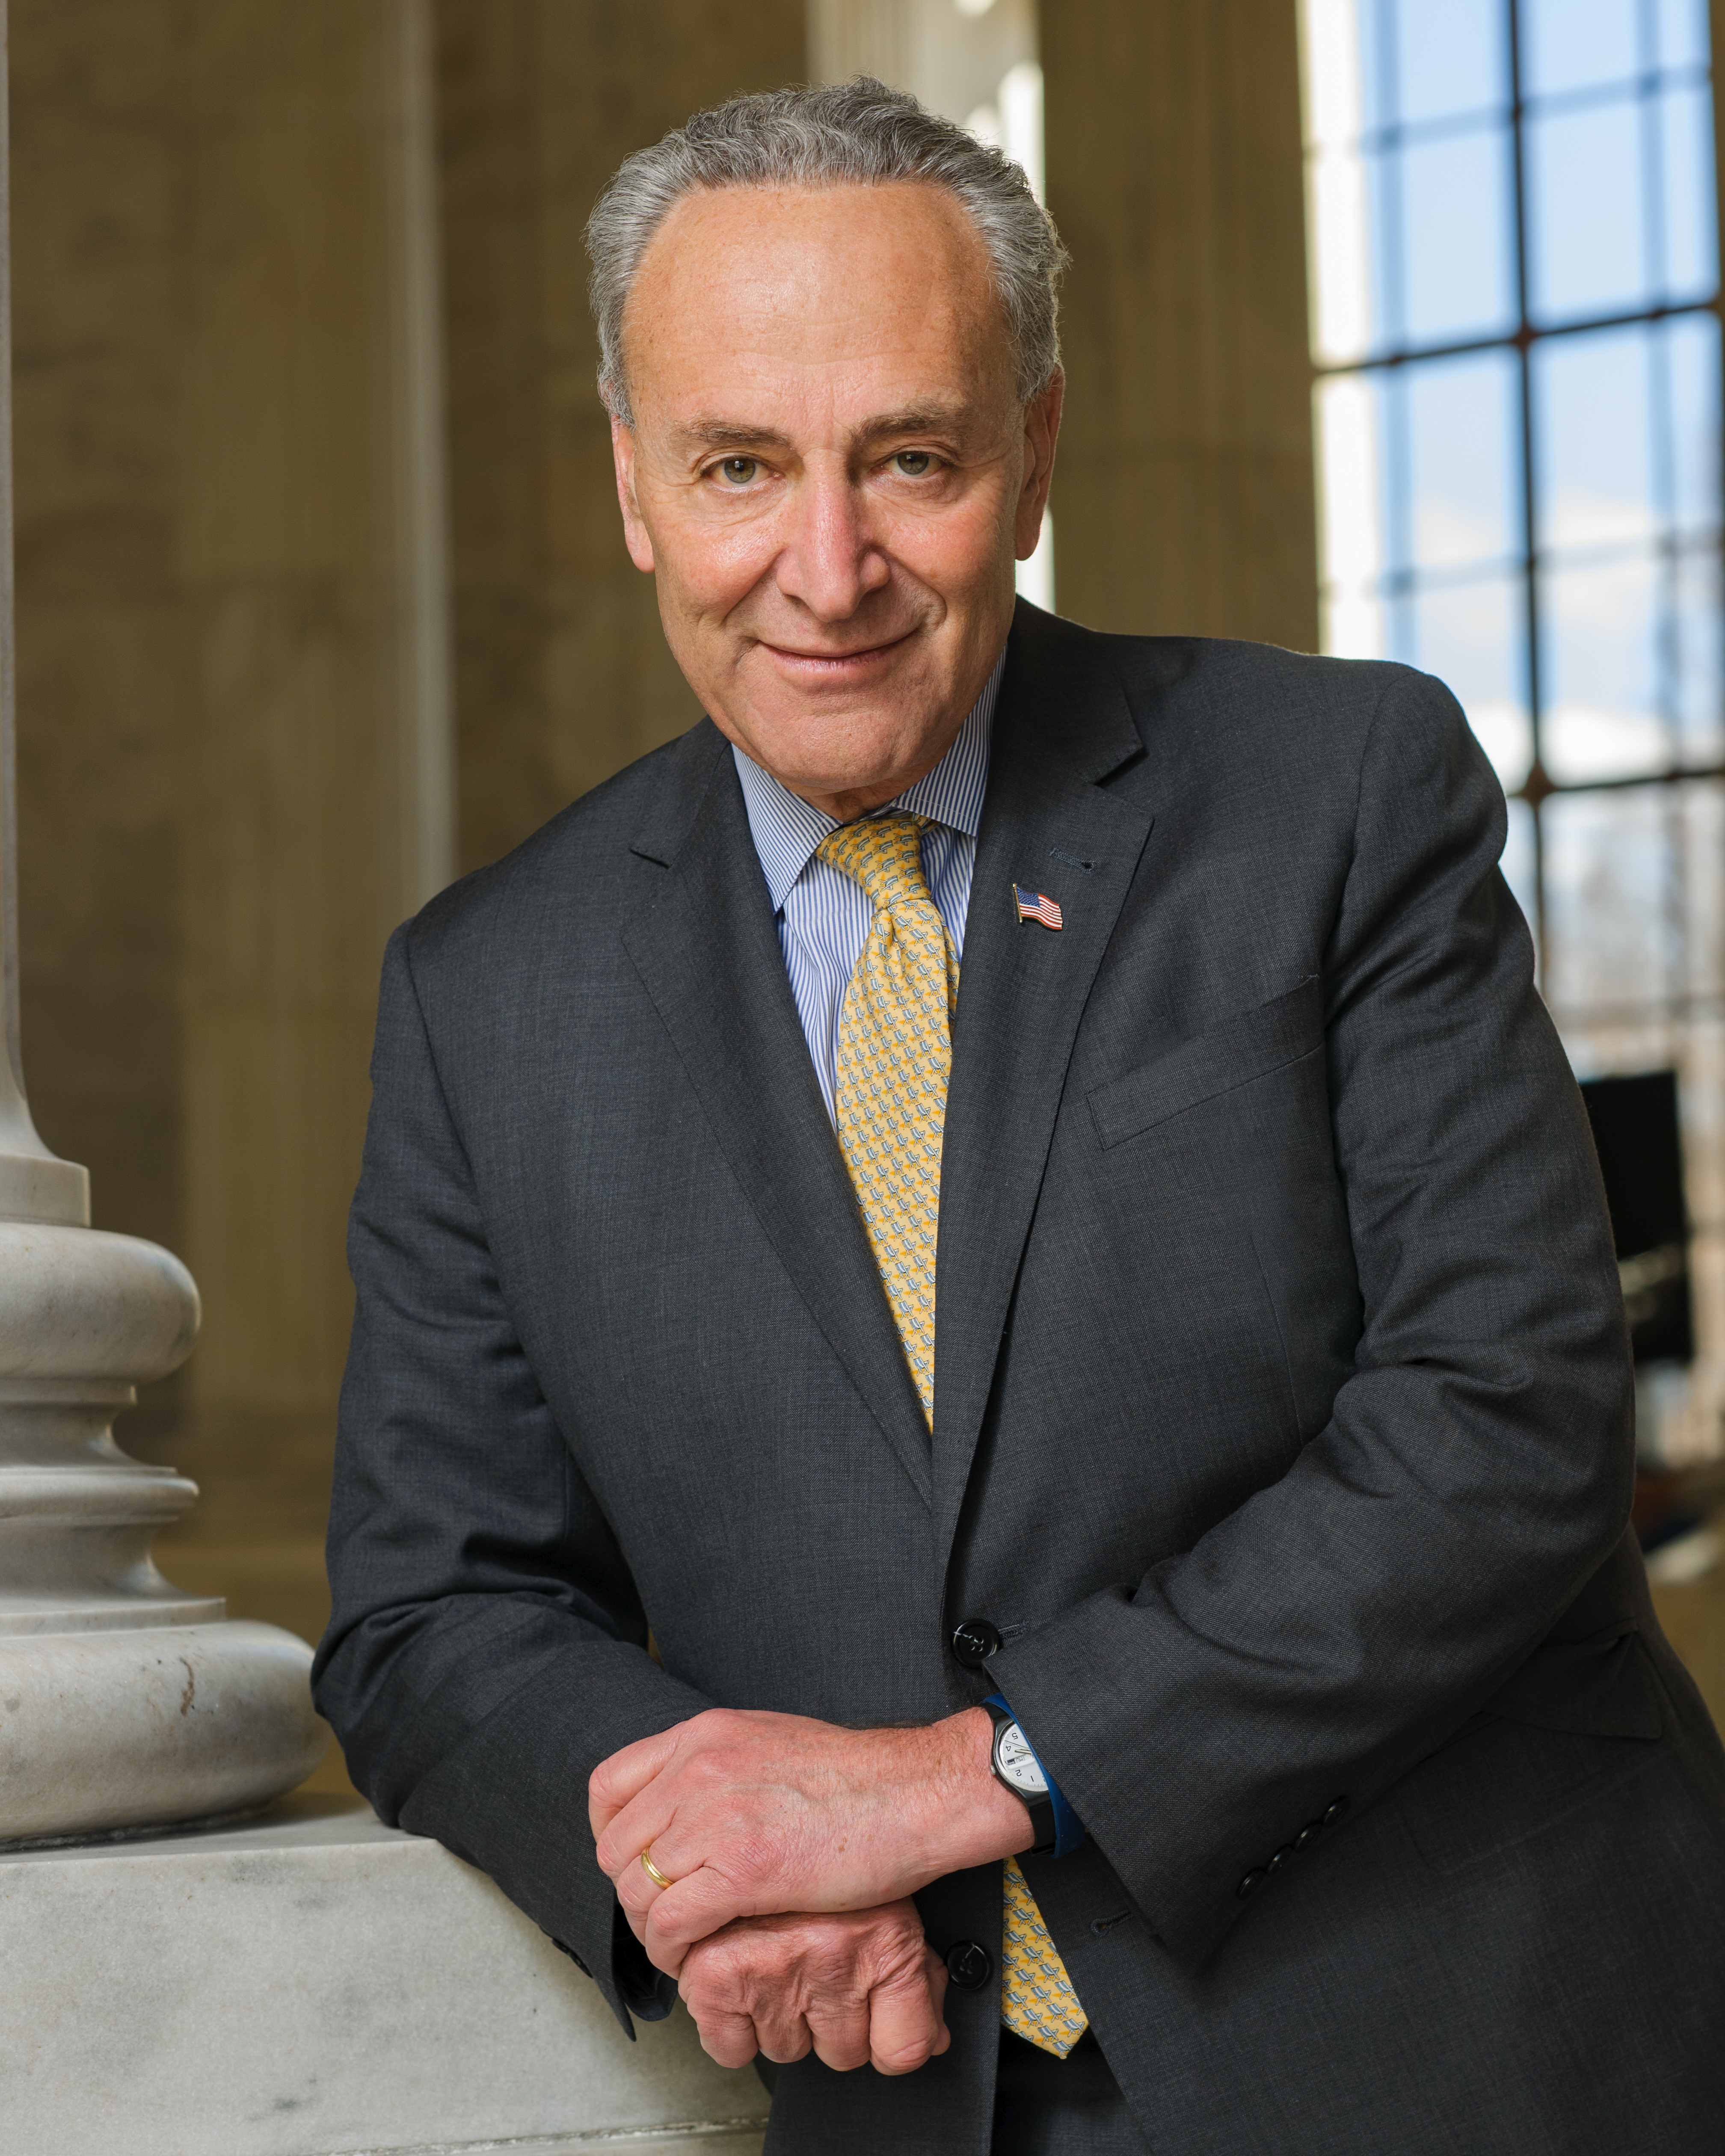 Image of Chuck Schumer